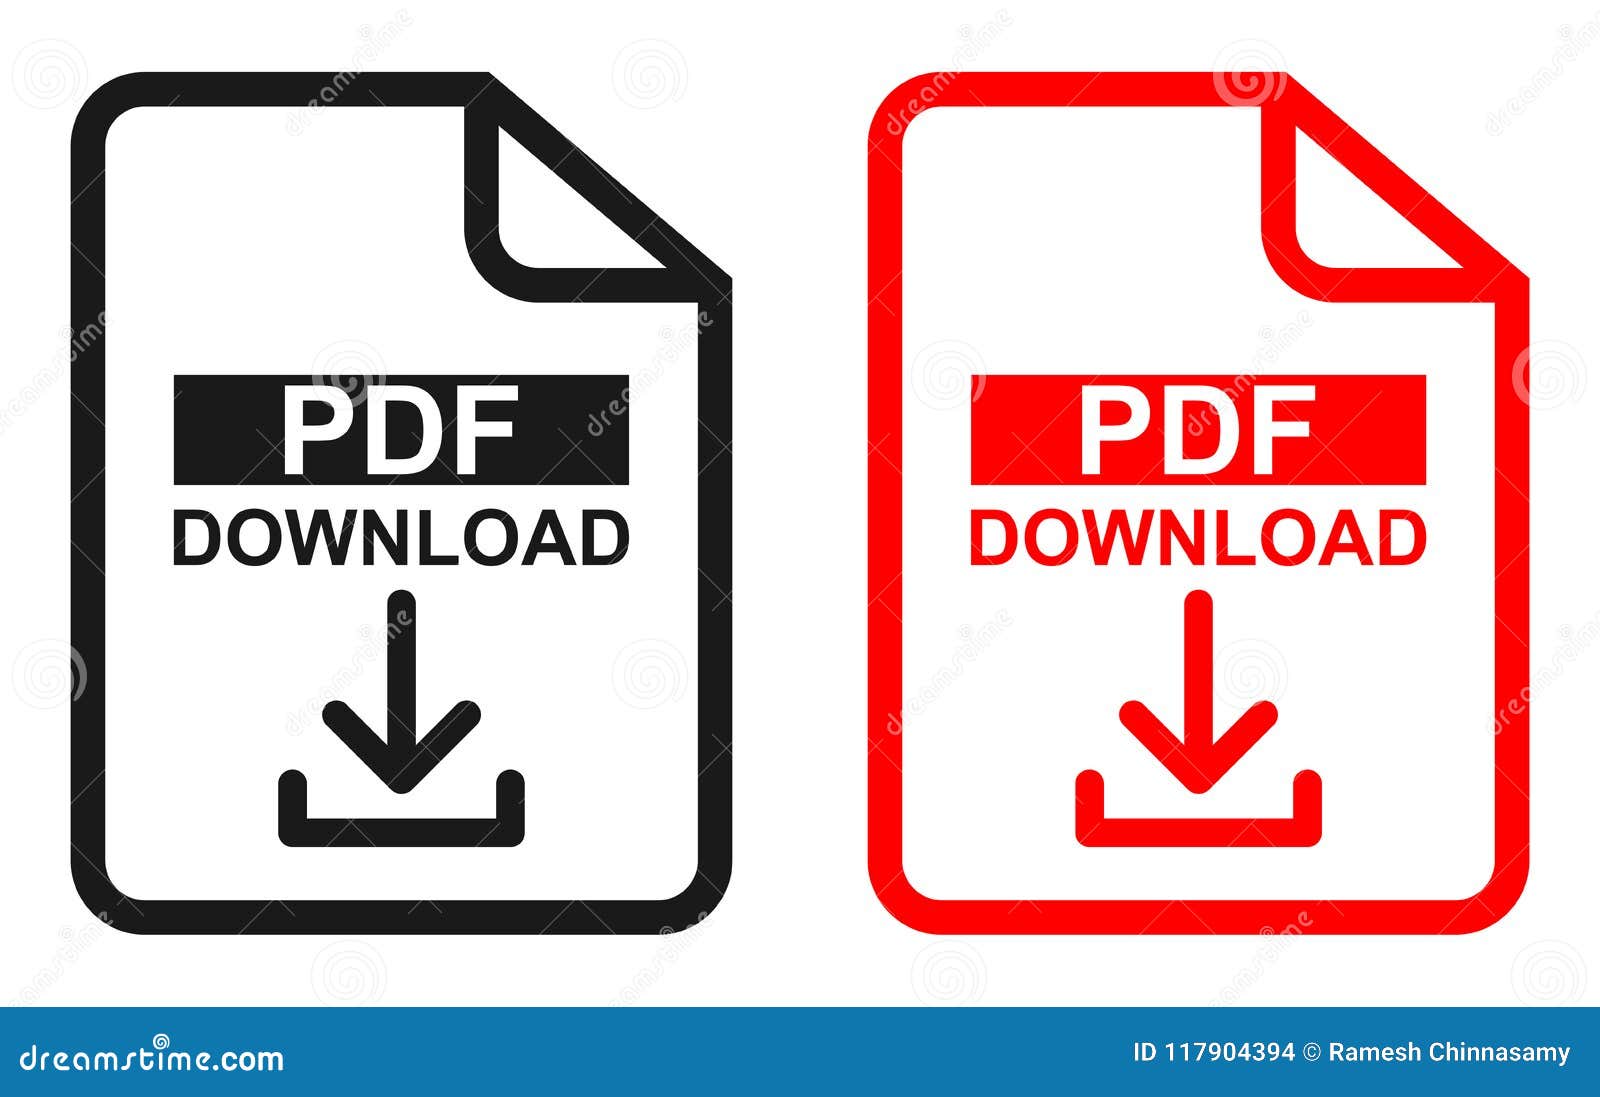 red and black color pdf file download icon